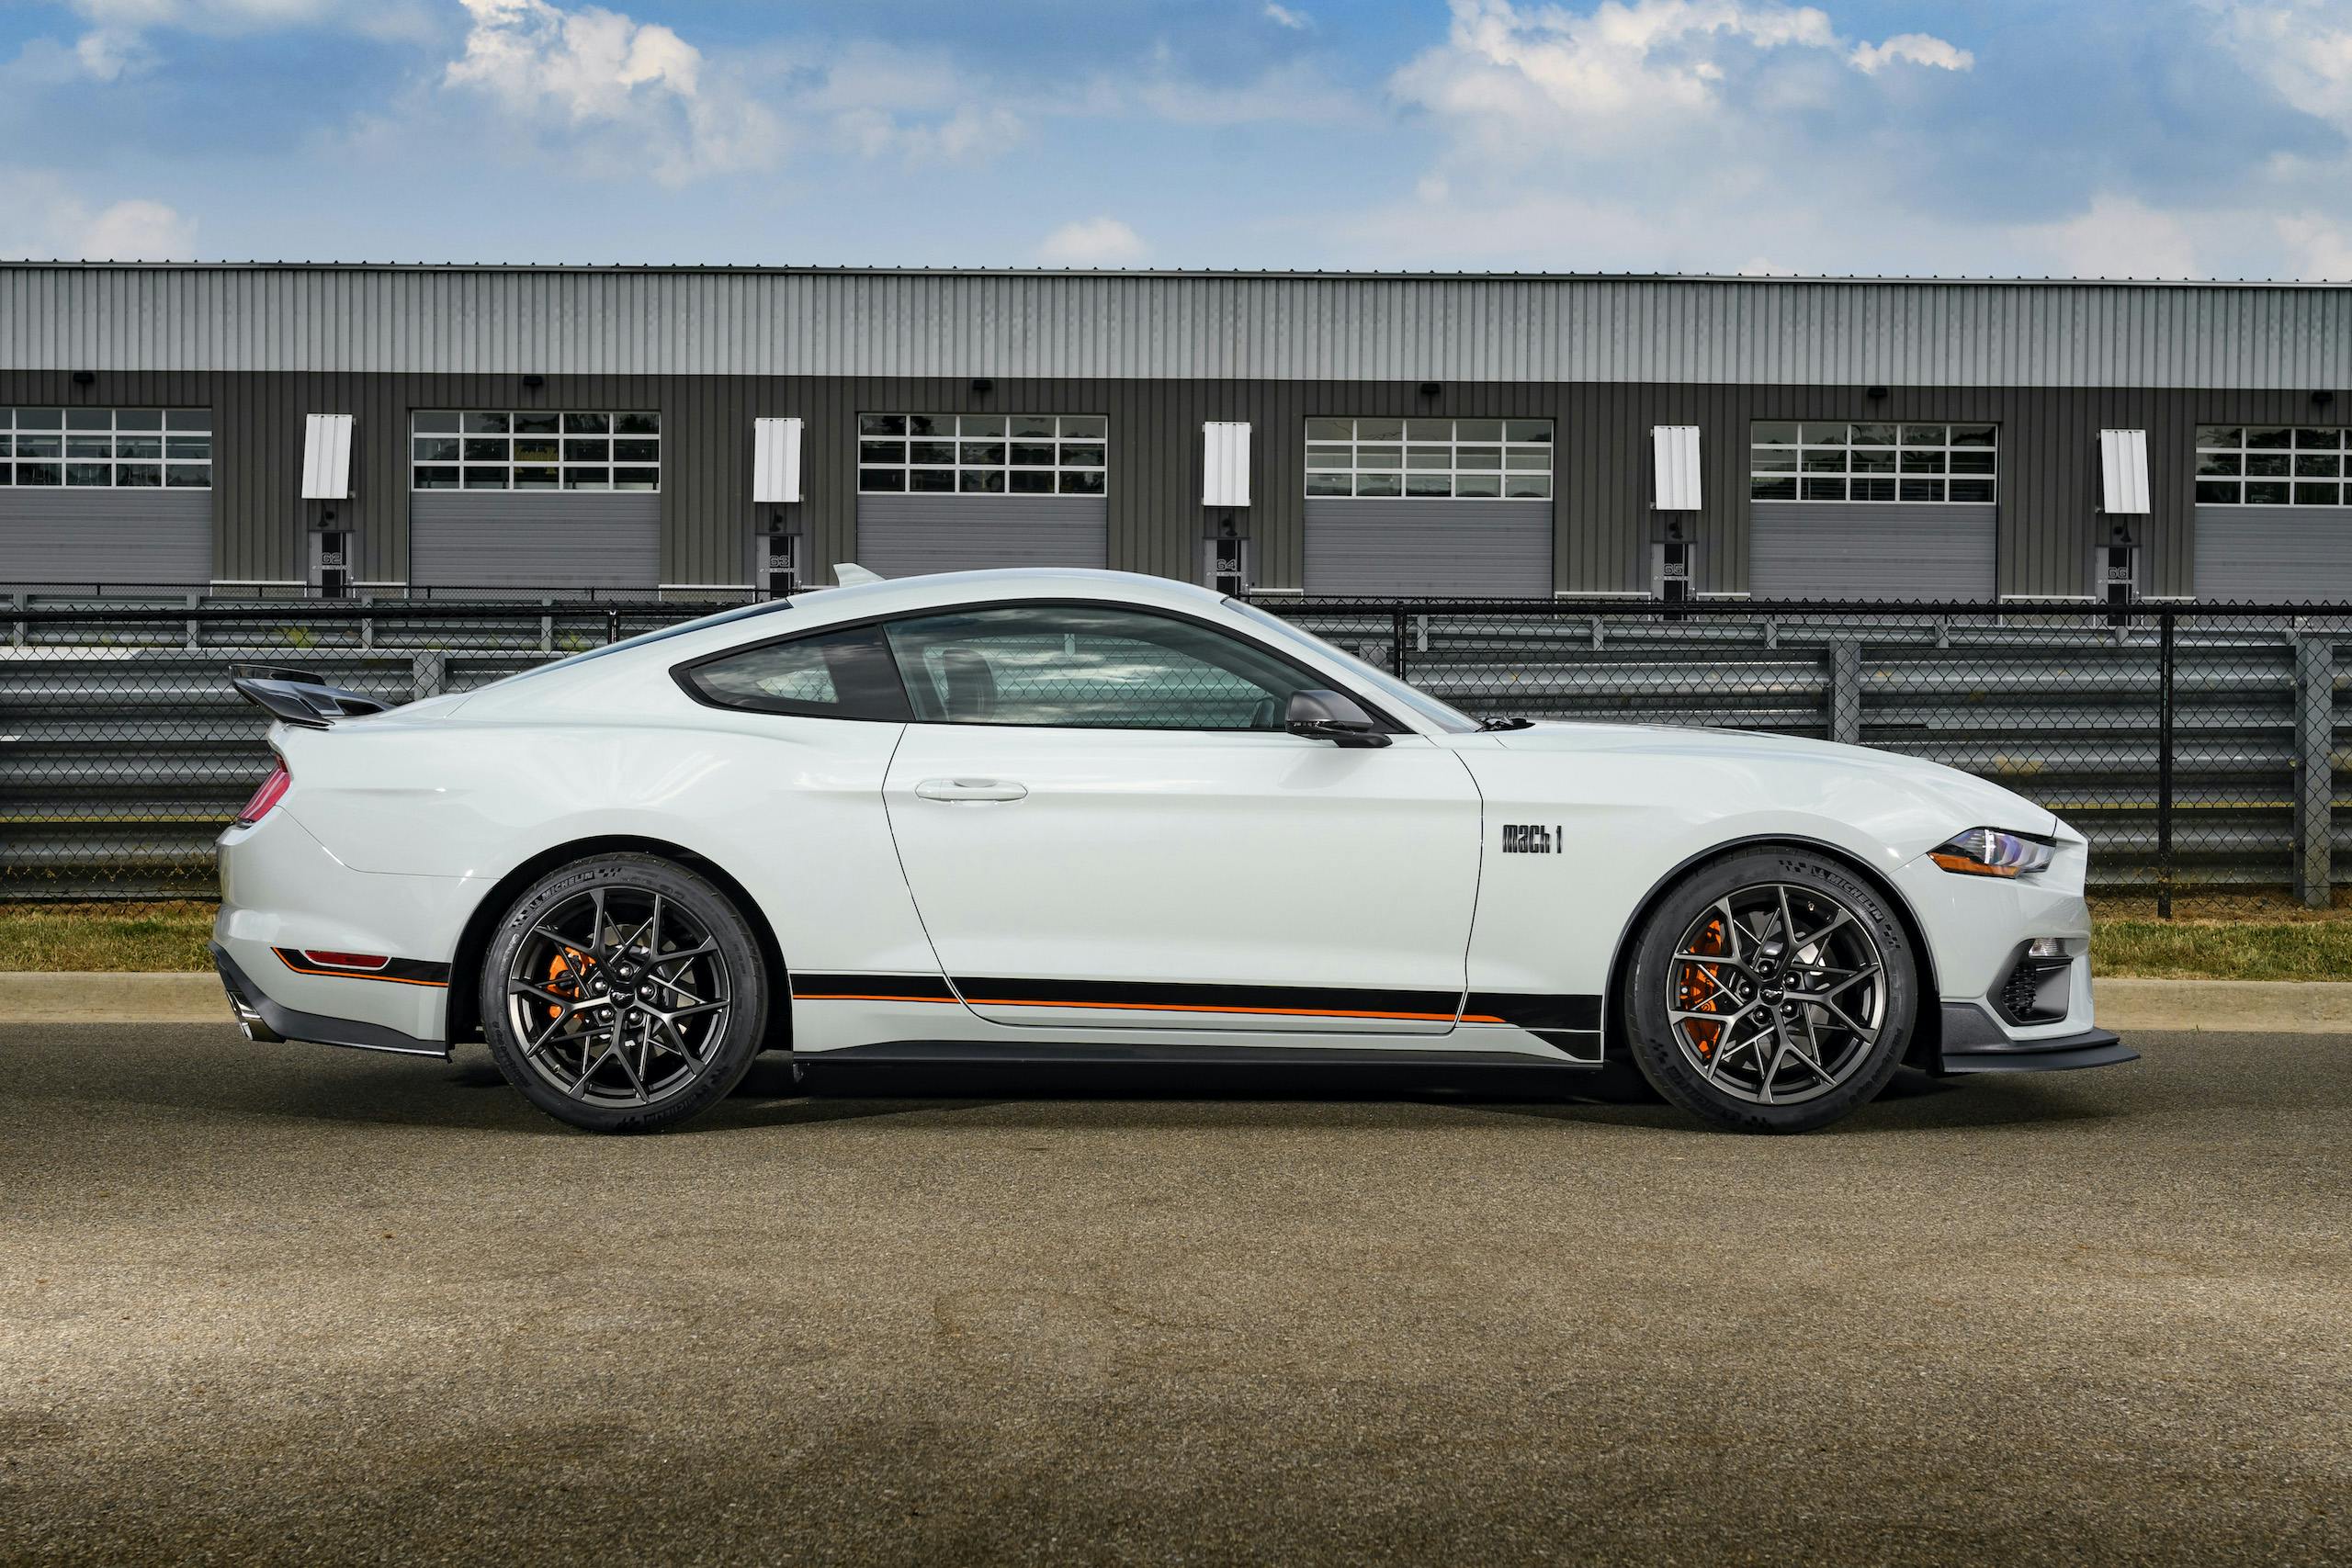 2021 Mustang Mach 1 white side profile